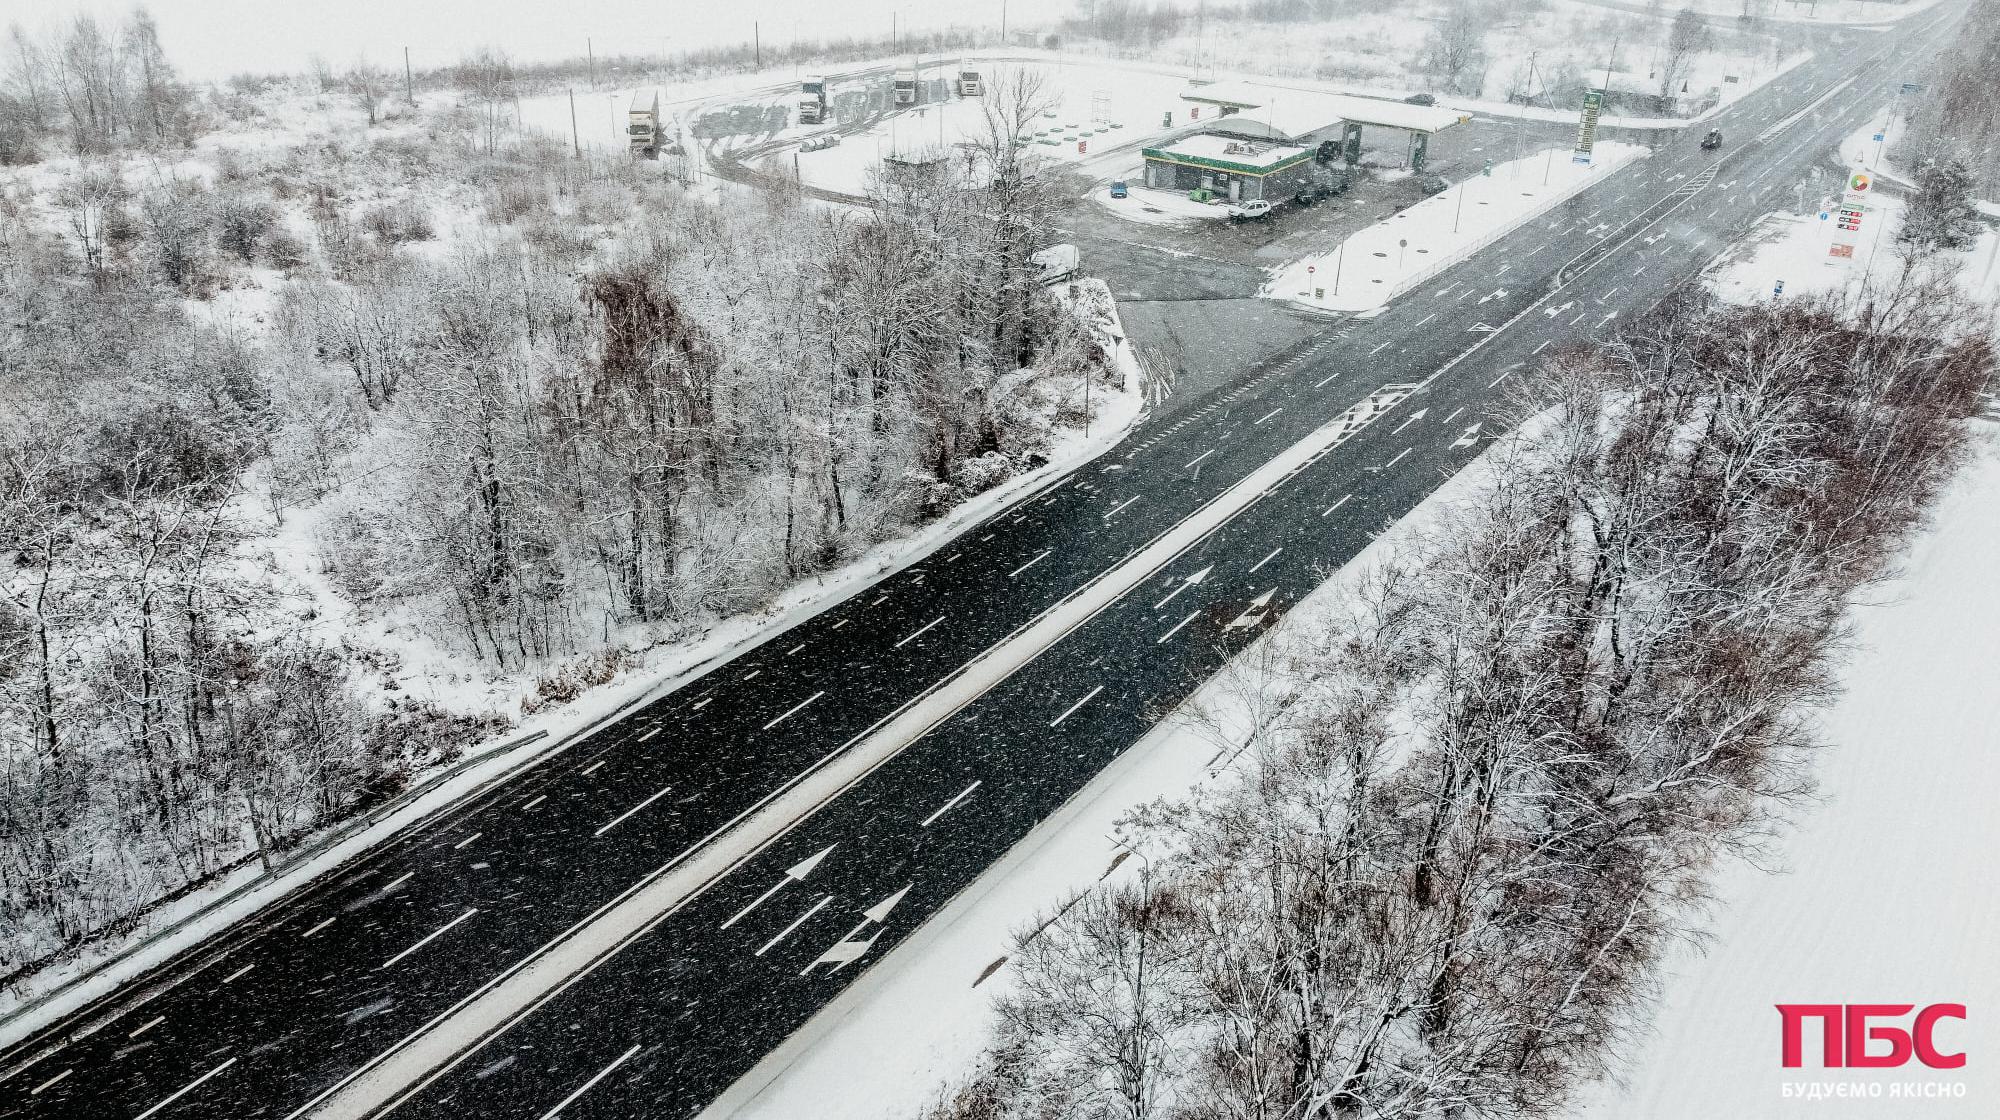 "PBS" to provide winter maintenance for major highways in 2 regions